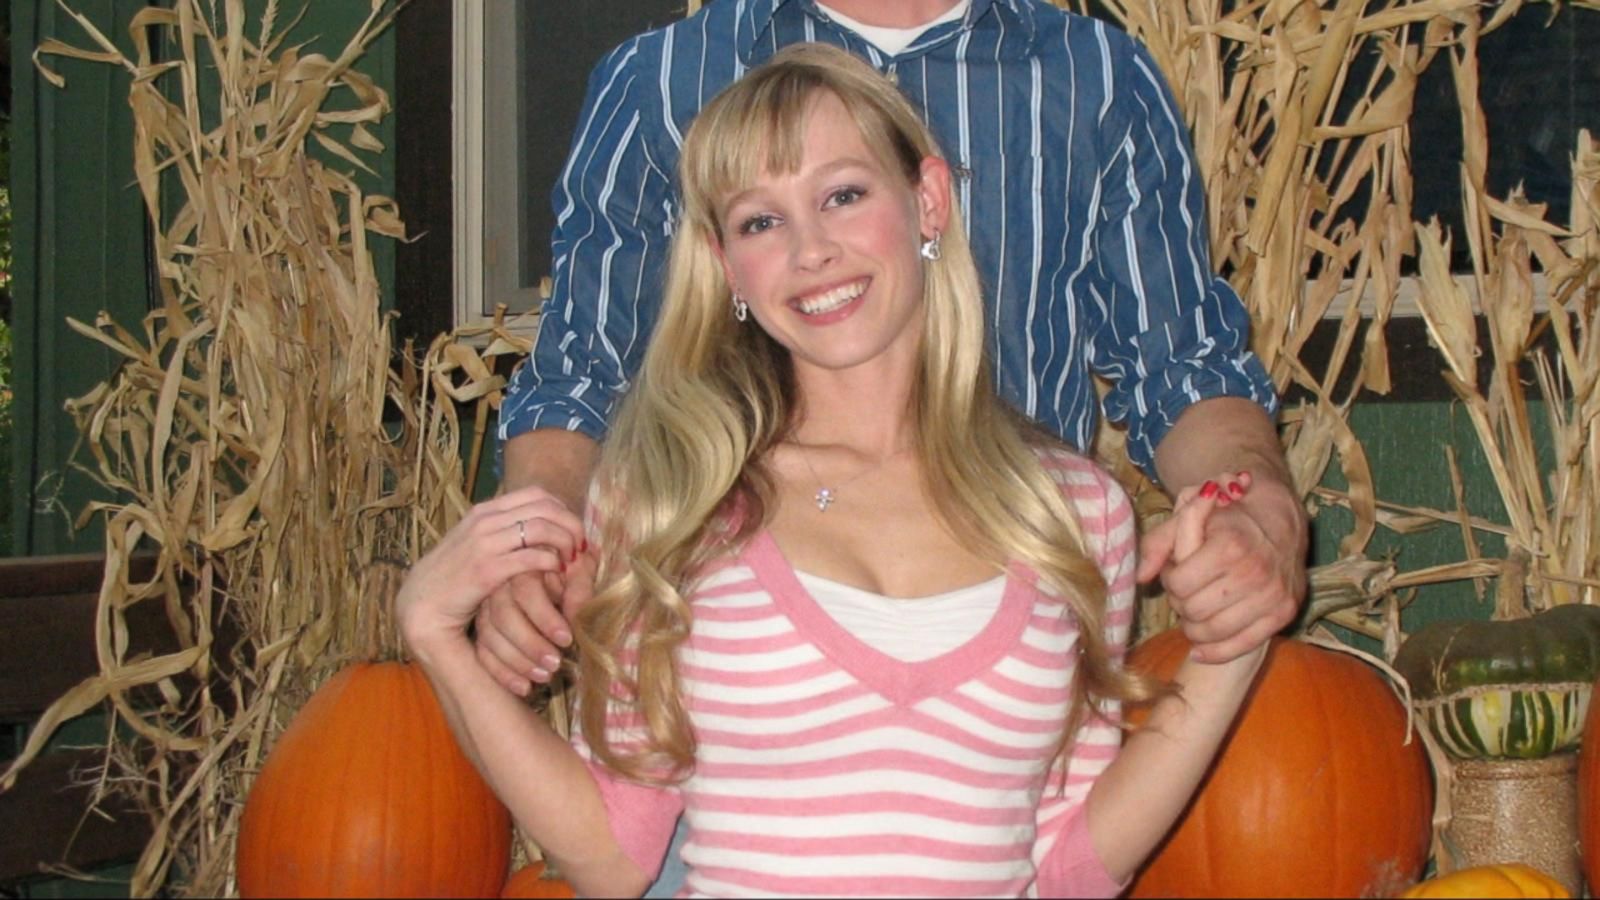 More details surface about mysterious abduction of Sherri Papini Good